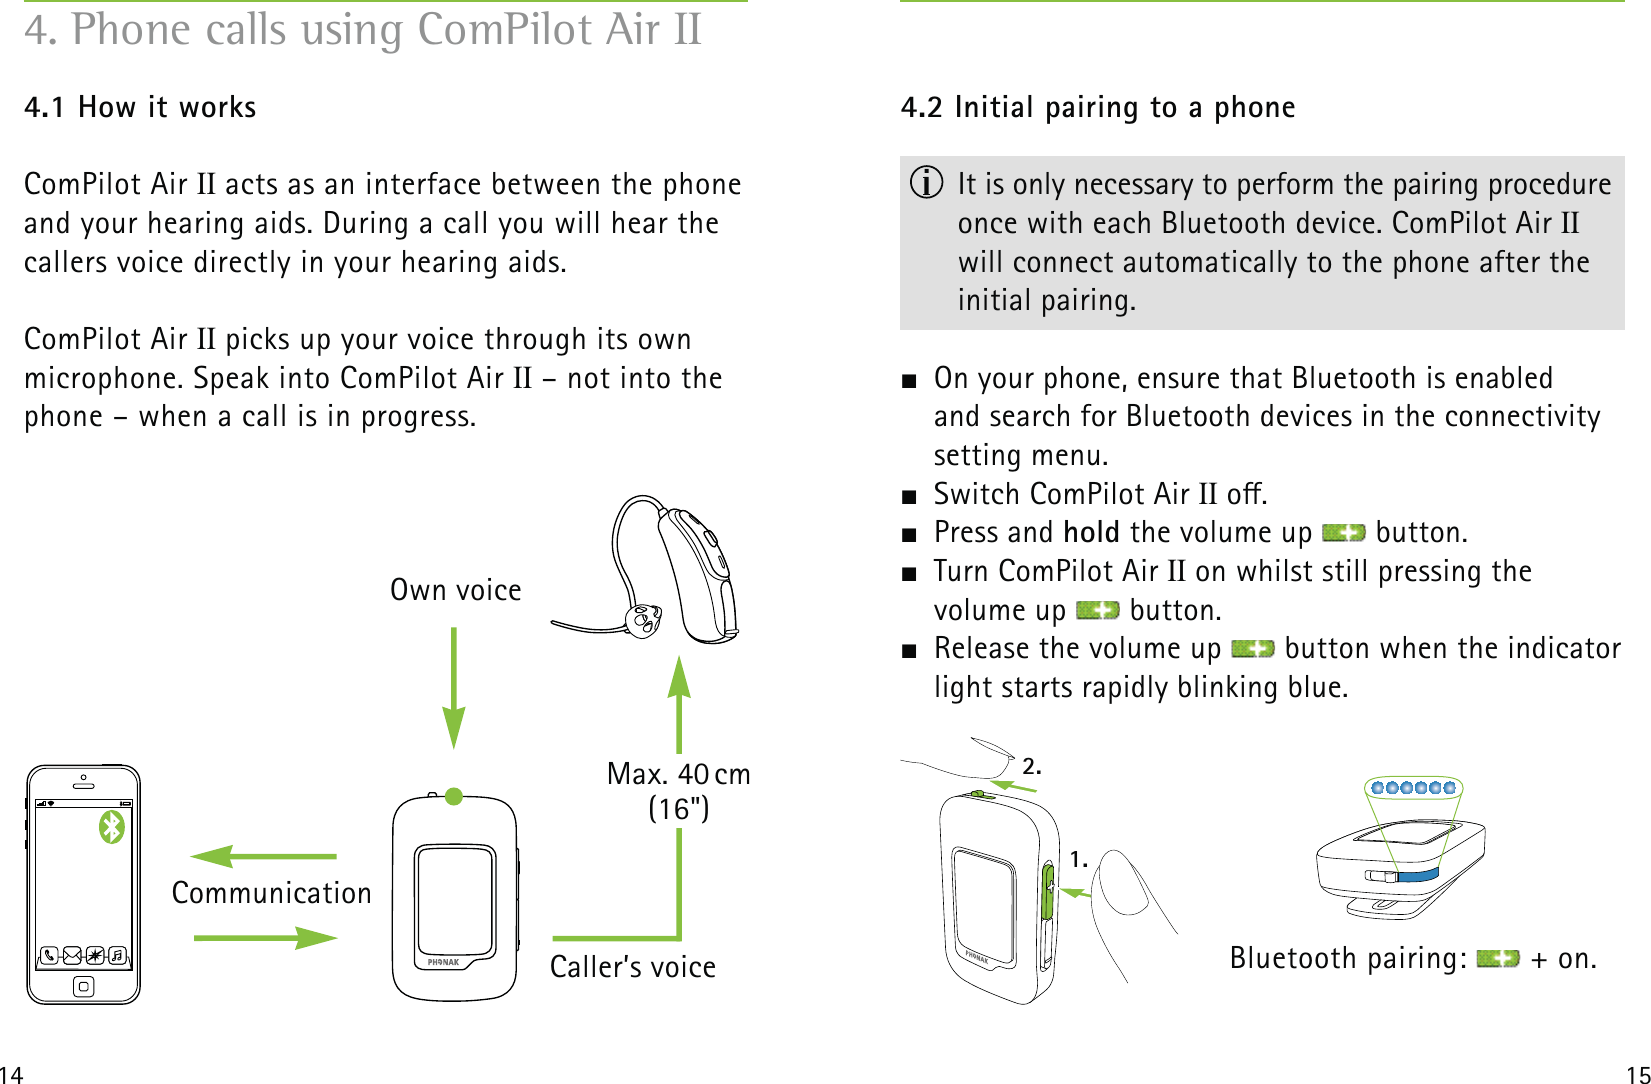 2.1.14 154.1 How it worksComPilot Air II acts as an interface between the phone and your hearing aids. During a call you will hear the callers voice directly in your hearing aids. ComPilot Air II picks up your voice through its own  microphone. Speak into ComPilot Air II – not into the phone – when a call is in progress. 4. Phone calls using ComPilot Air IIOwn voiceCaller’s voiceMax. 40 cm (16&quot;)Communication4.2 Initial pairing to a phone  It is only necessary to perform the pairing procedure once with each Bluetooth device. ComPilot Air II will connect automatically to the phone after the initial pairing.  On your phone, ensure that Bluetooth is enabled  and search for Bluetooth devices in the connectivity setting menu.  Switch ComPilot Air II o. Press and hold the volume up   button.  Turn ComPilot Air II on whilst still pressing the  volume up   button.  Release the volume up   button when the indicator light starts rapidly blinking blue. Bluetooth pairing:   + on.